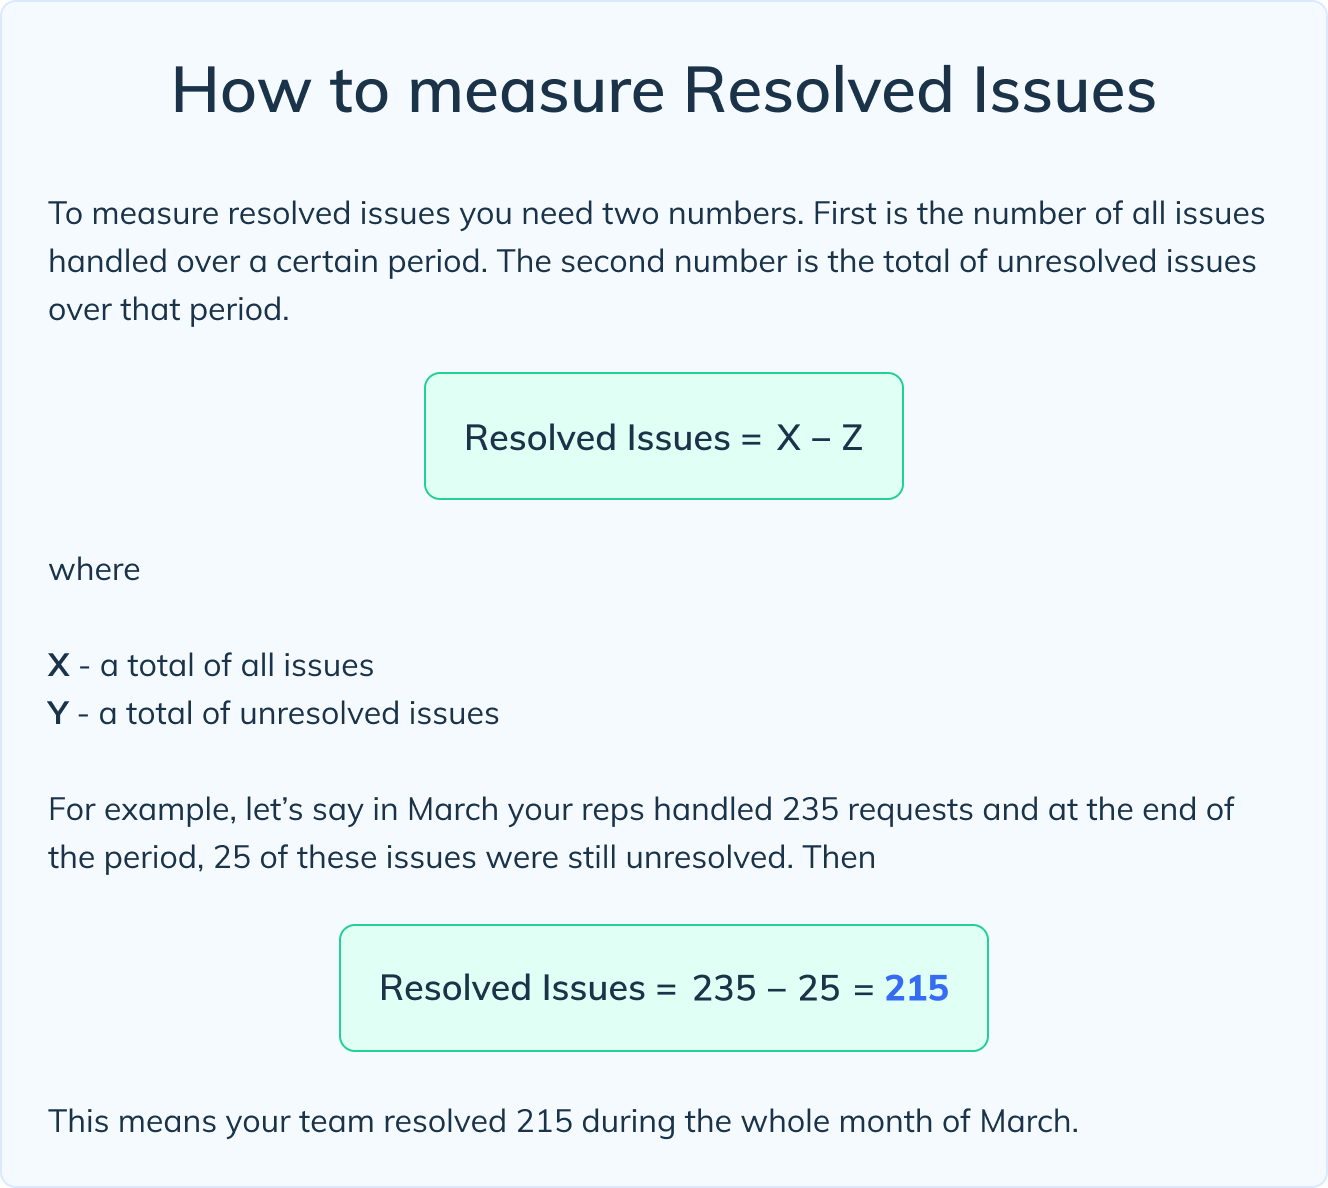 How to measure Resolved Issues